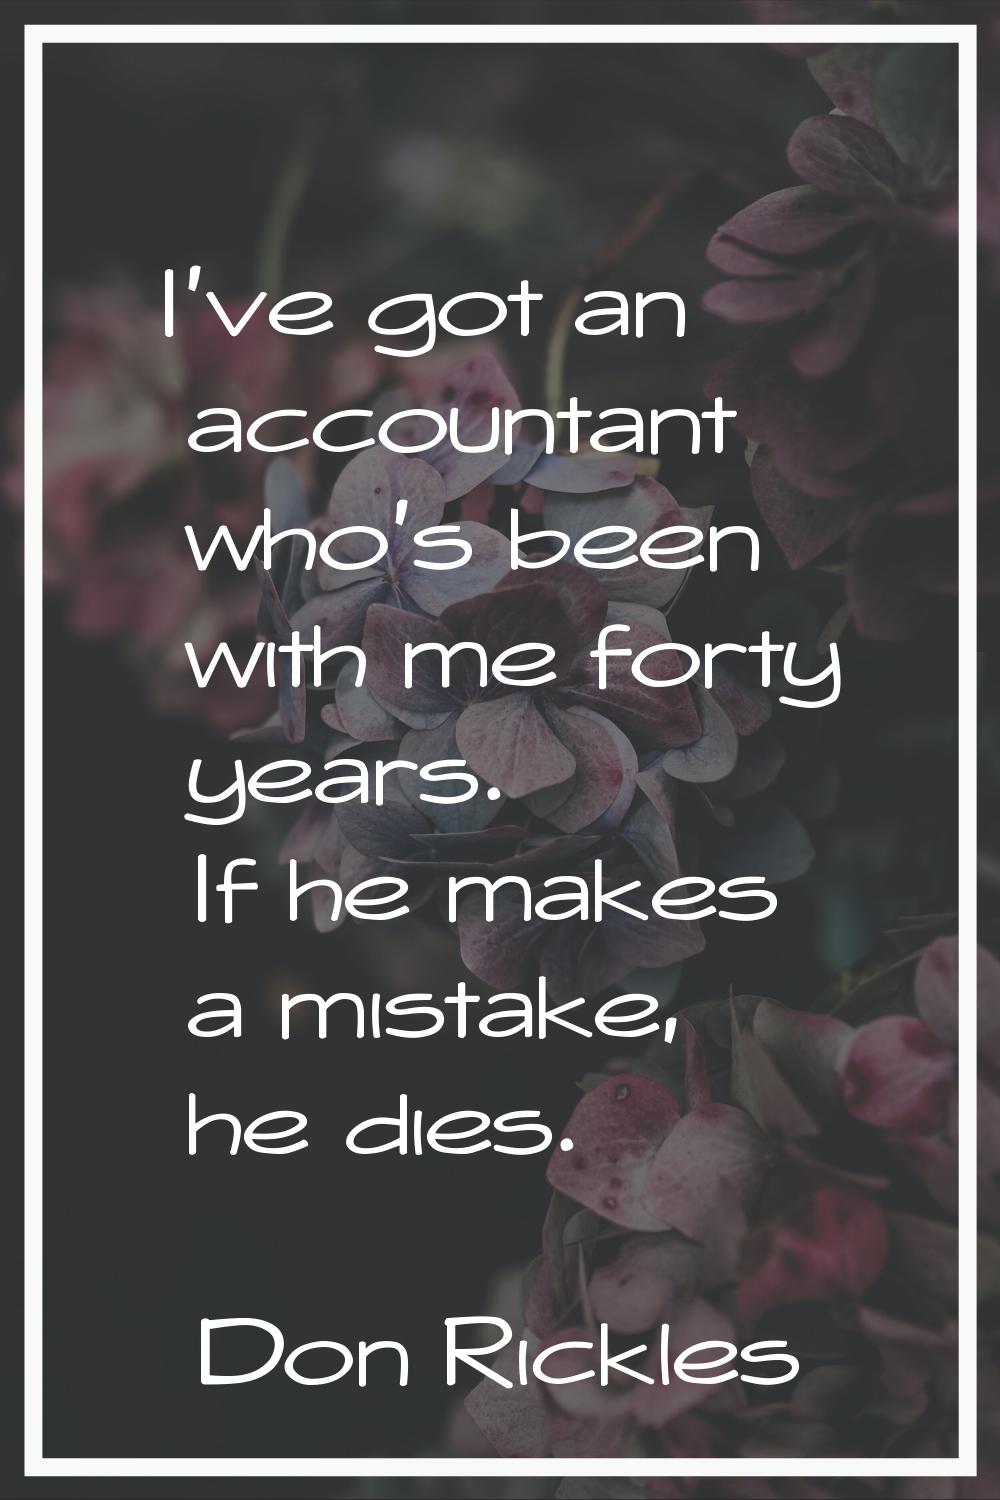 I've got an accountant who's been with me forty years. If he makes a mistake, he dies.